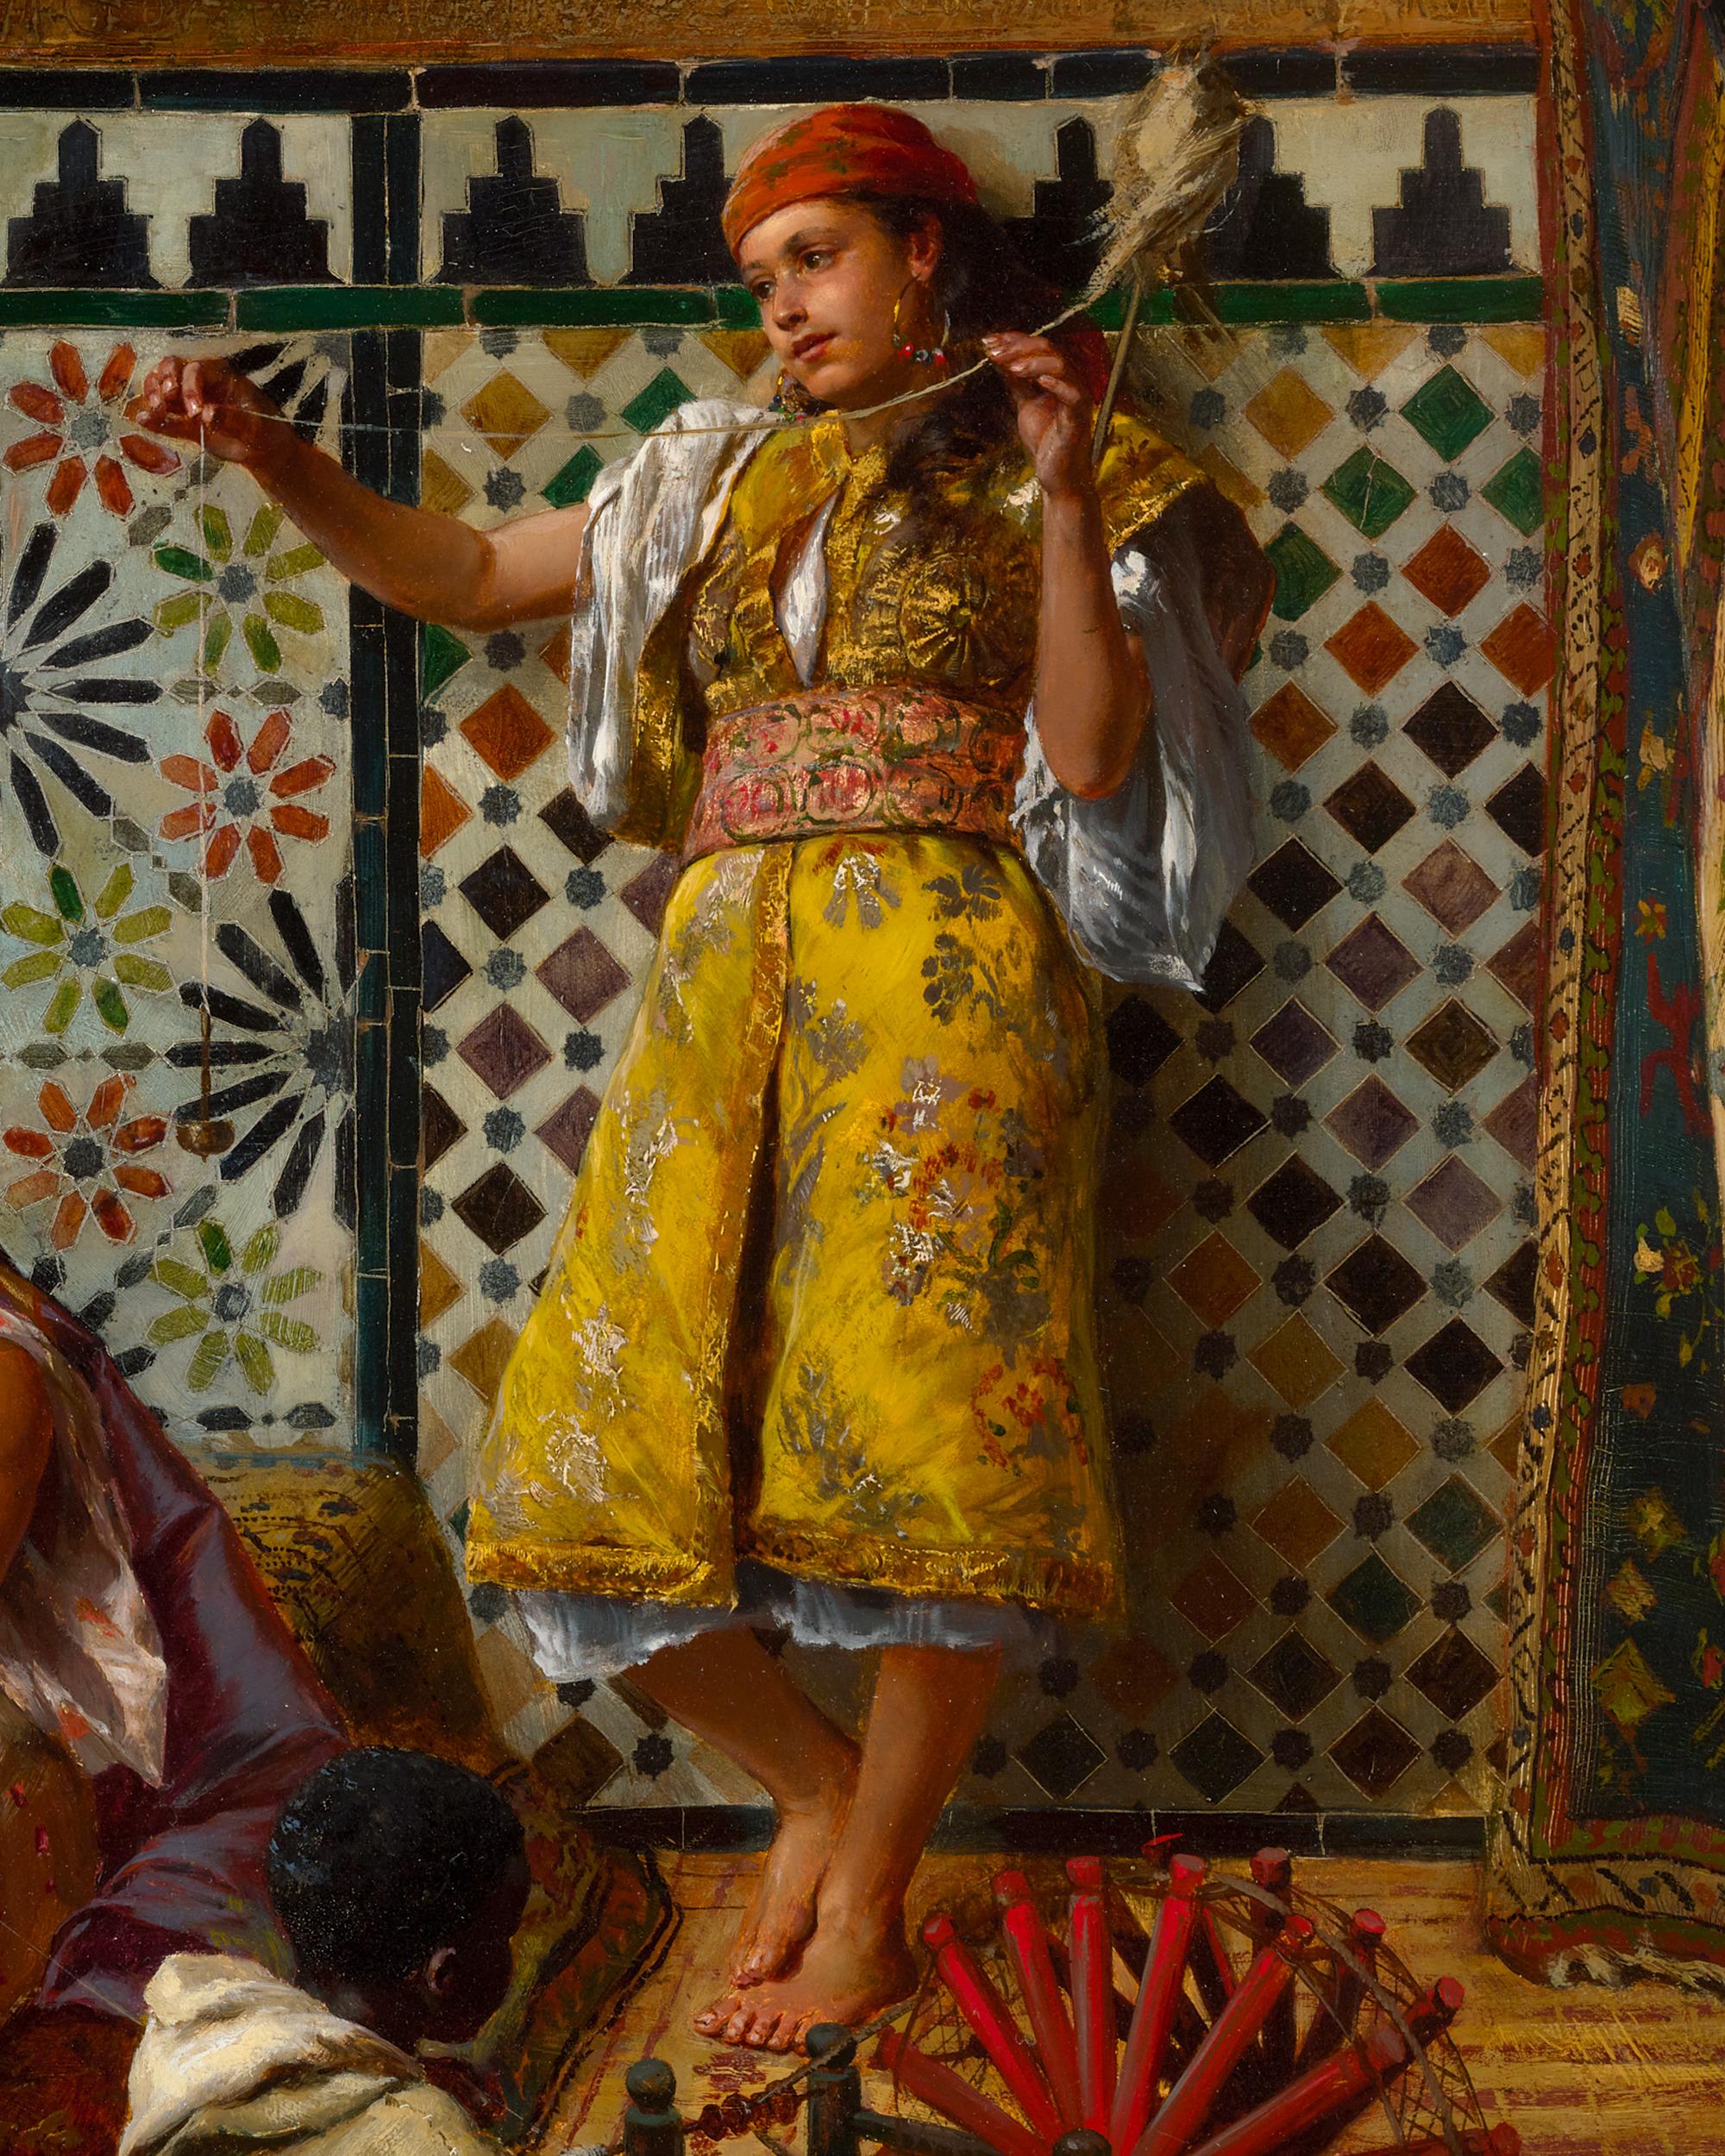 Rudolf Ernst
1854-1932  Austrian

Spinning Yarn

Signed and dated “R. Ernst 86” (lower right)
Oil on panel

Austro-French Orientalist painter Rudolf Ernst showcases his aptitude for the genre in this skillfully executed oil on panel. In it, two